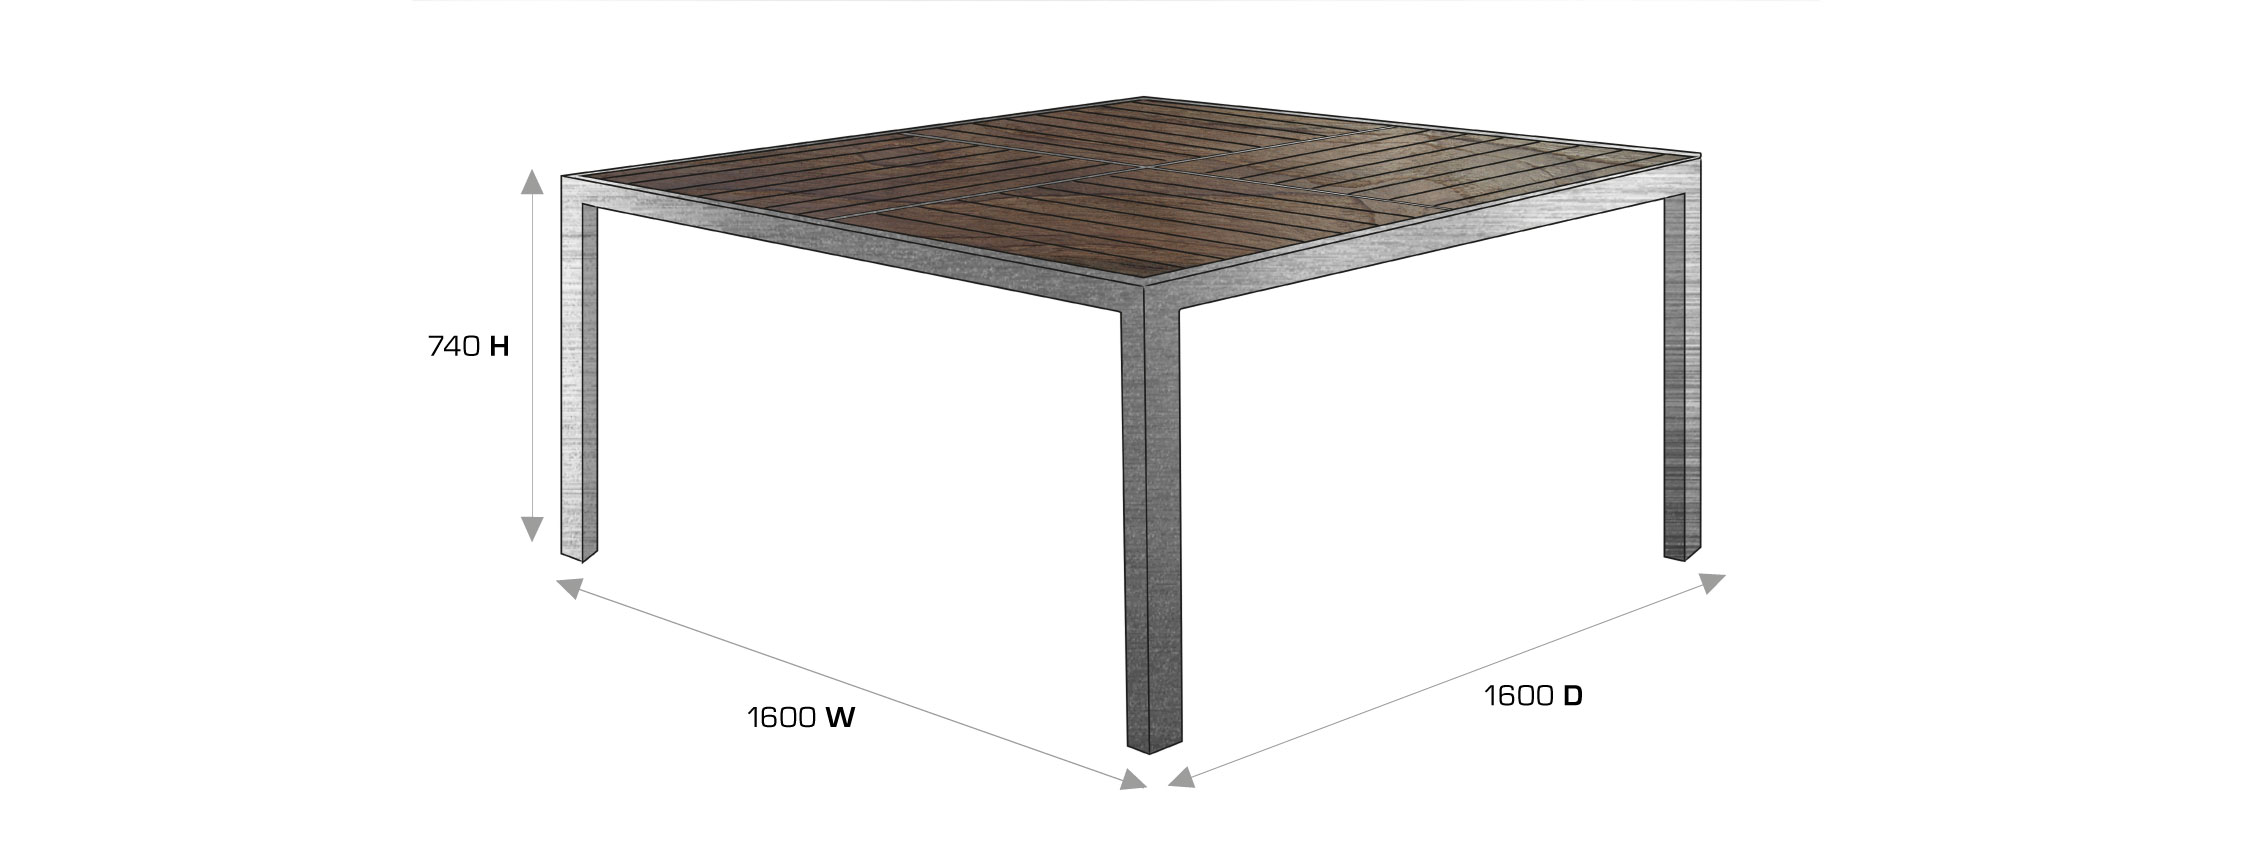 outdoor dining table dimensions photo - 5